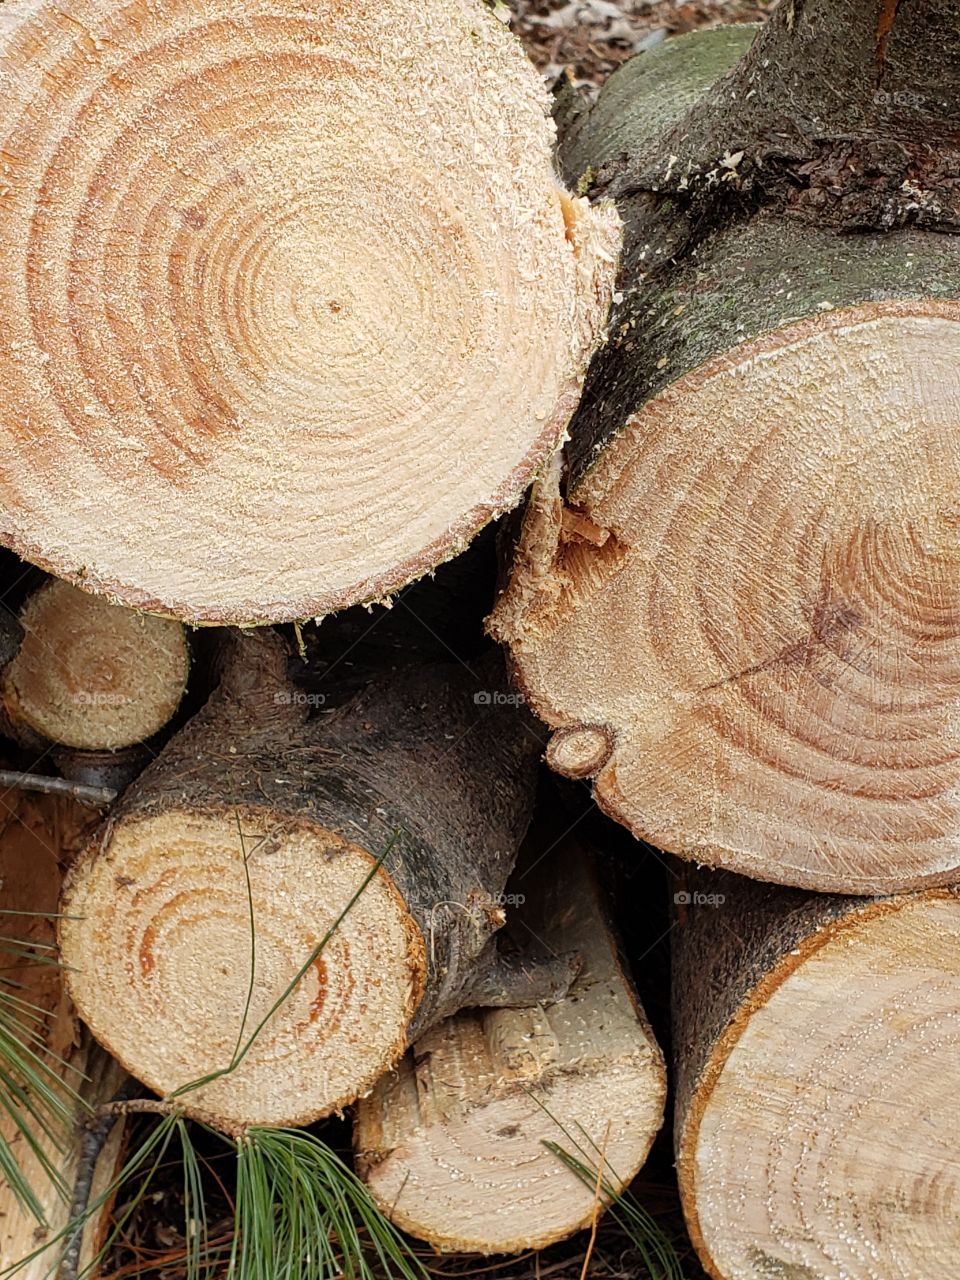 Stack of fresh cut logs showing tree rings